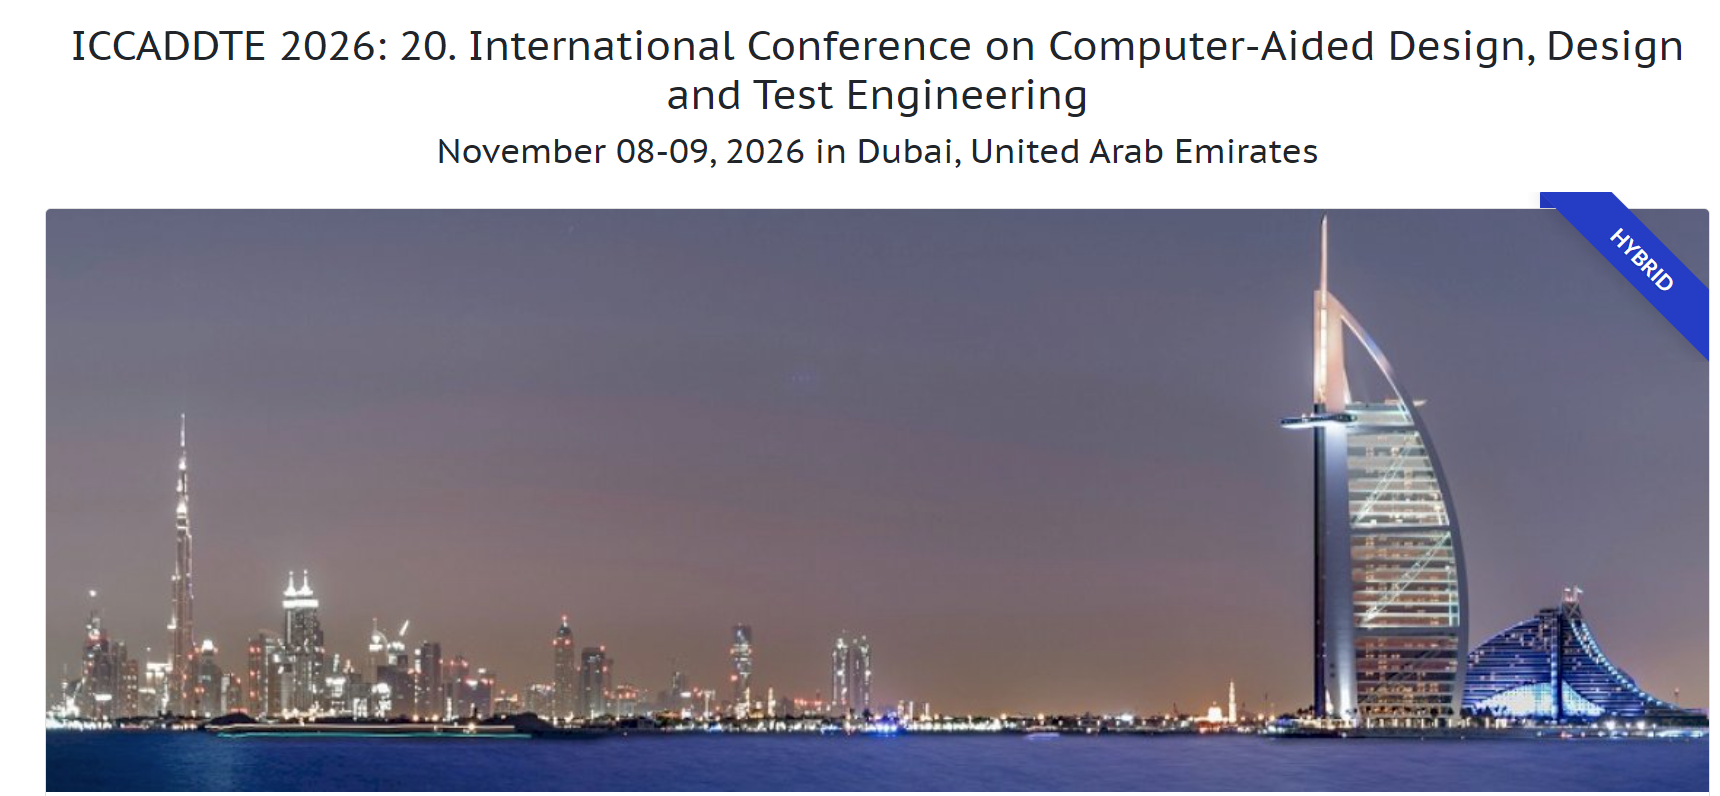 ICCADDTE 2026 20. International Conference on Computer-Aided Design, Design and Test Engineering